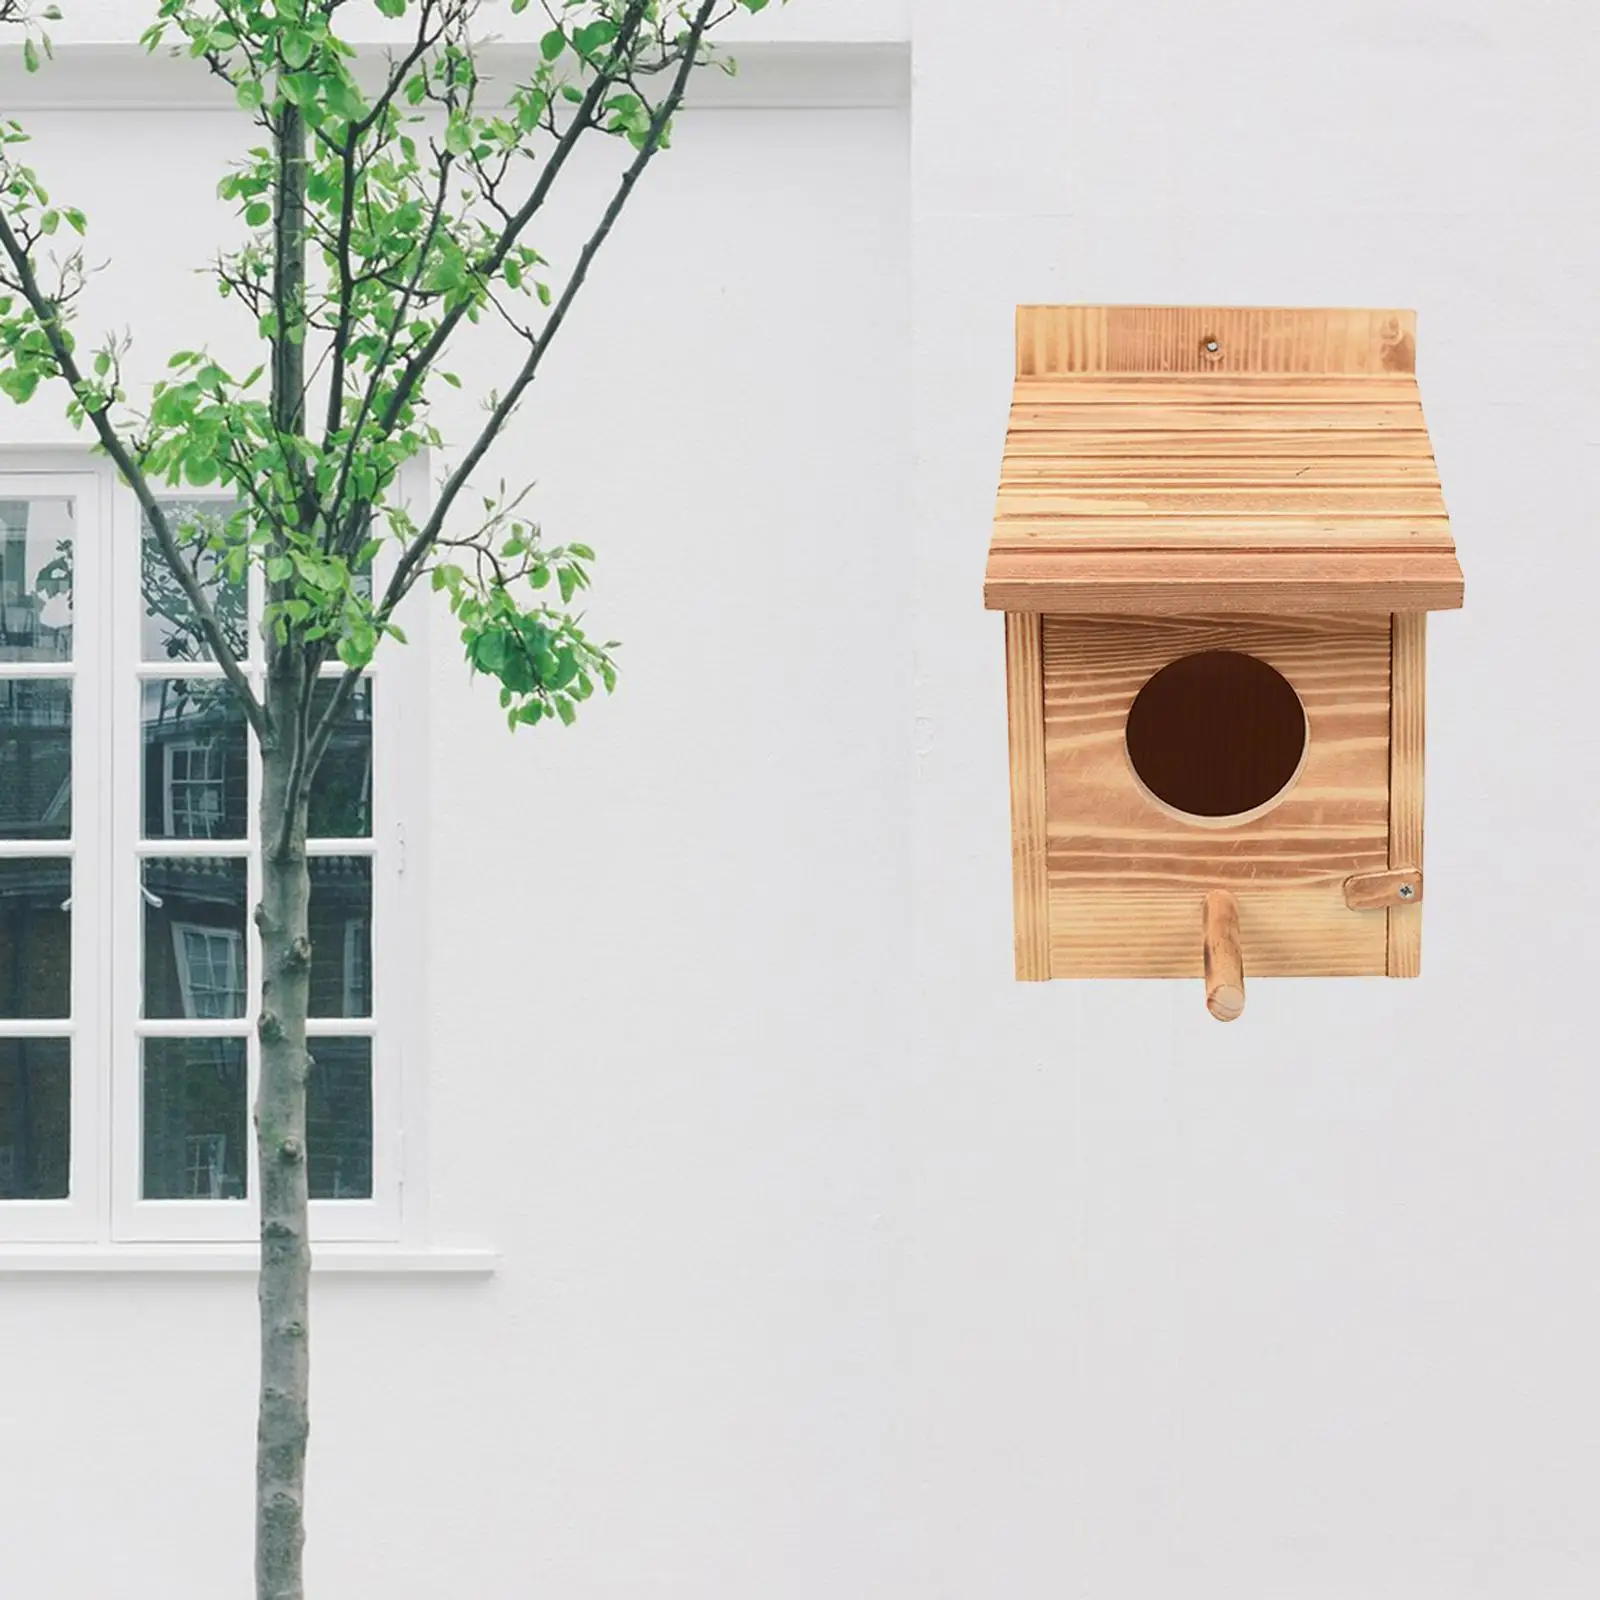 Wooden Pet Bird Nests House Breeding Box Cage Birdhouse Accessories for Parrots